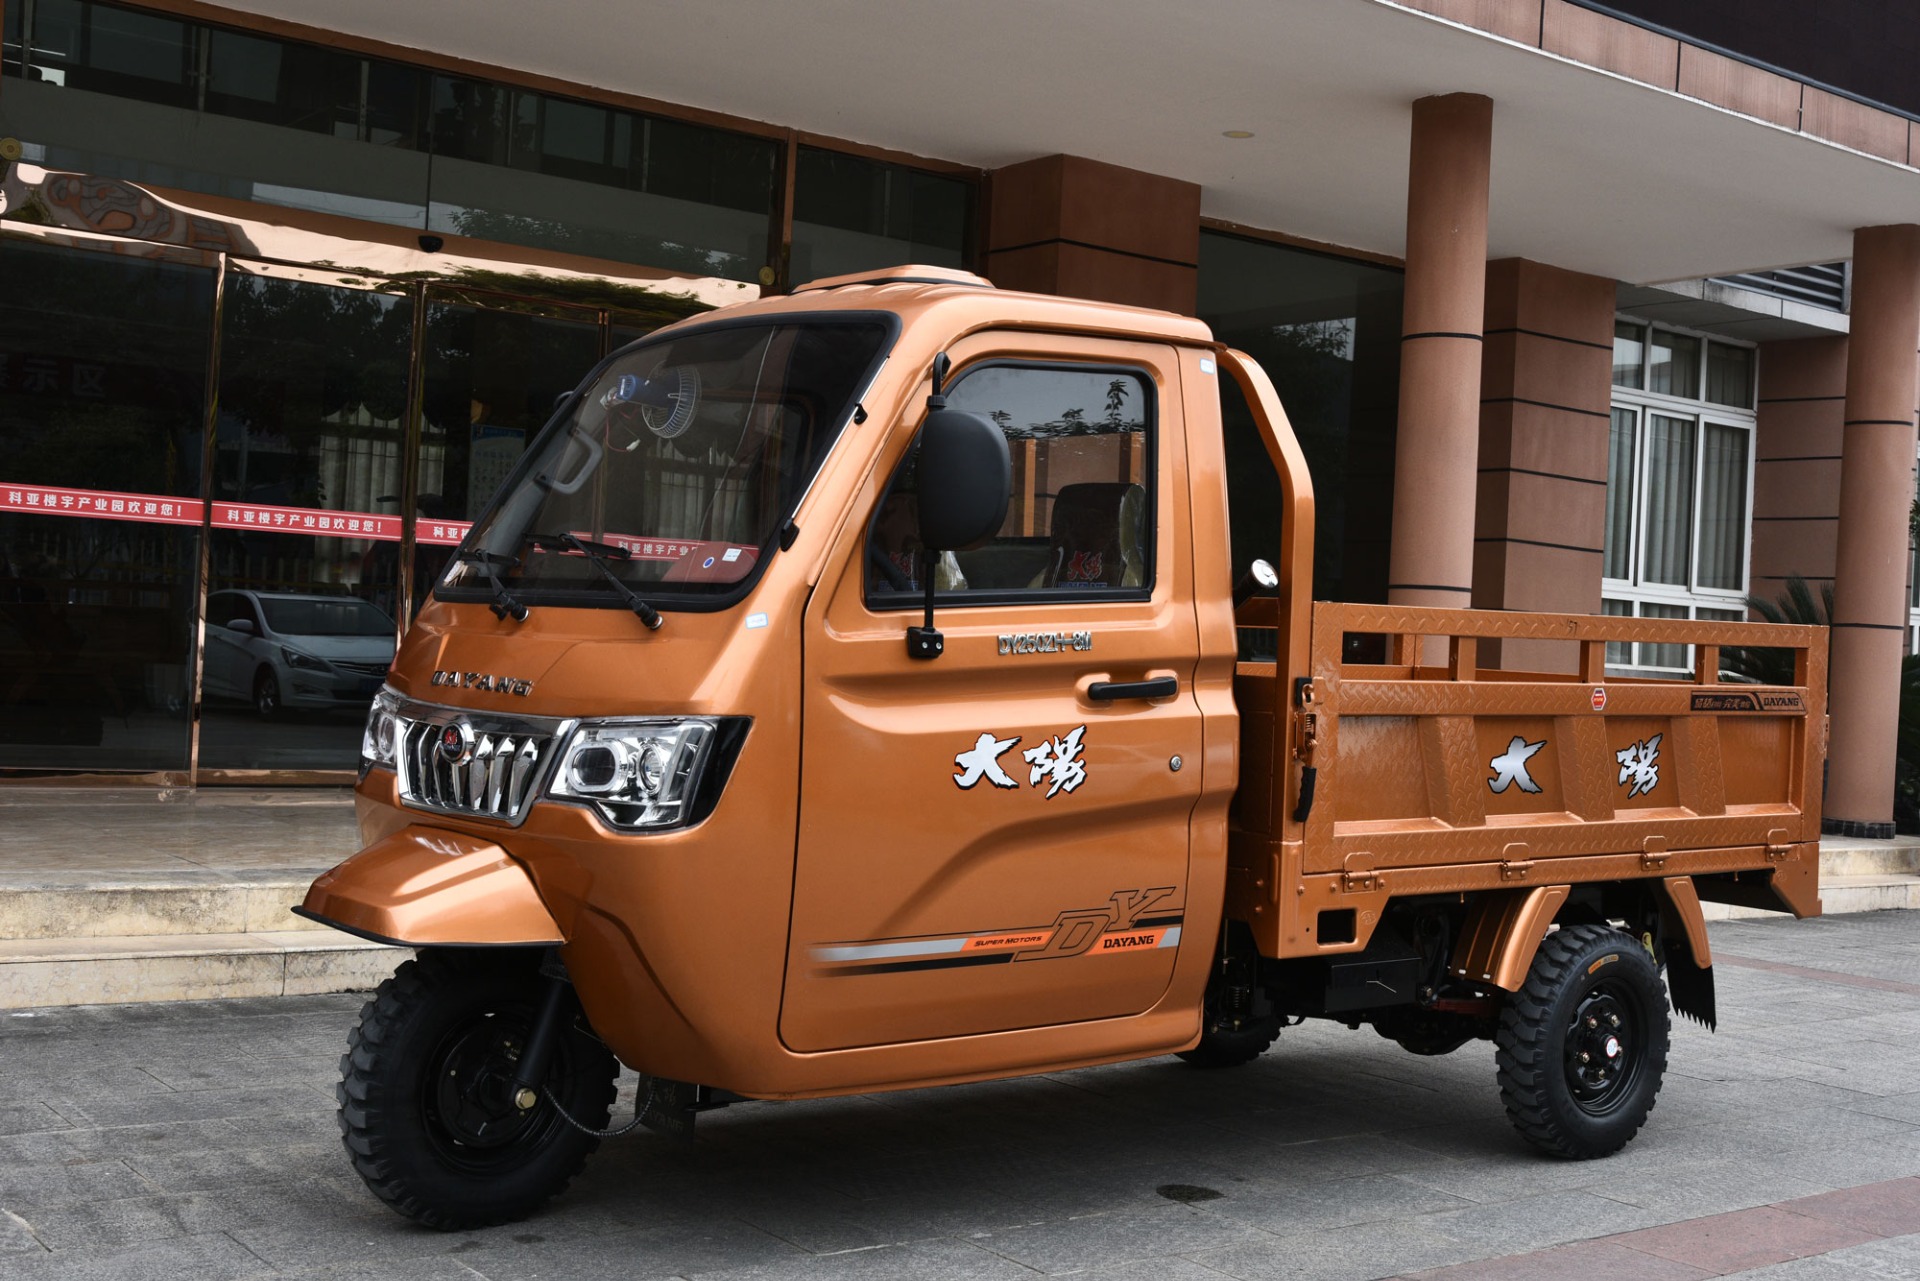 DAYANG Adult  300CC Water Cooling Customized  Three Wheel Tricycle For Cargo Heavy Load enclosed